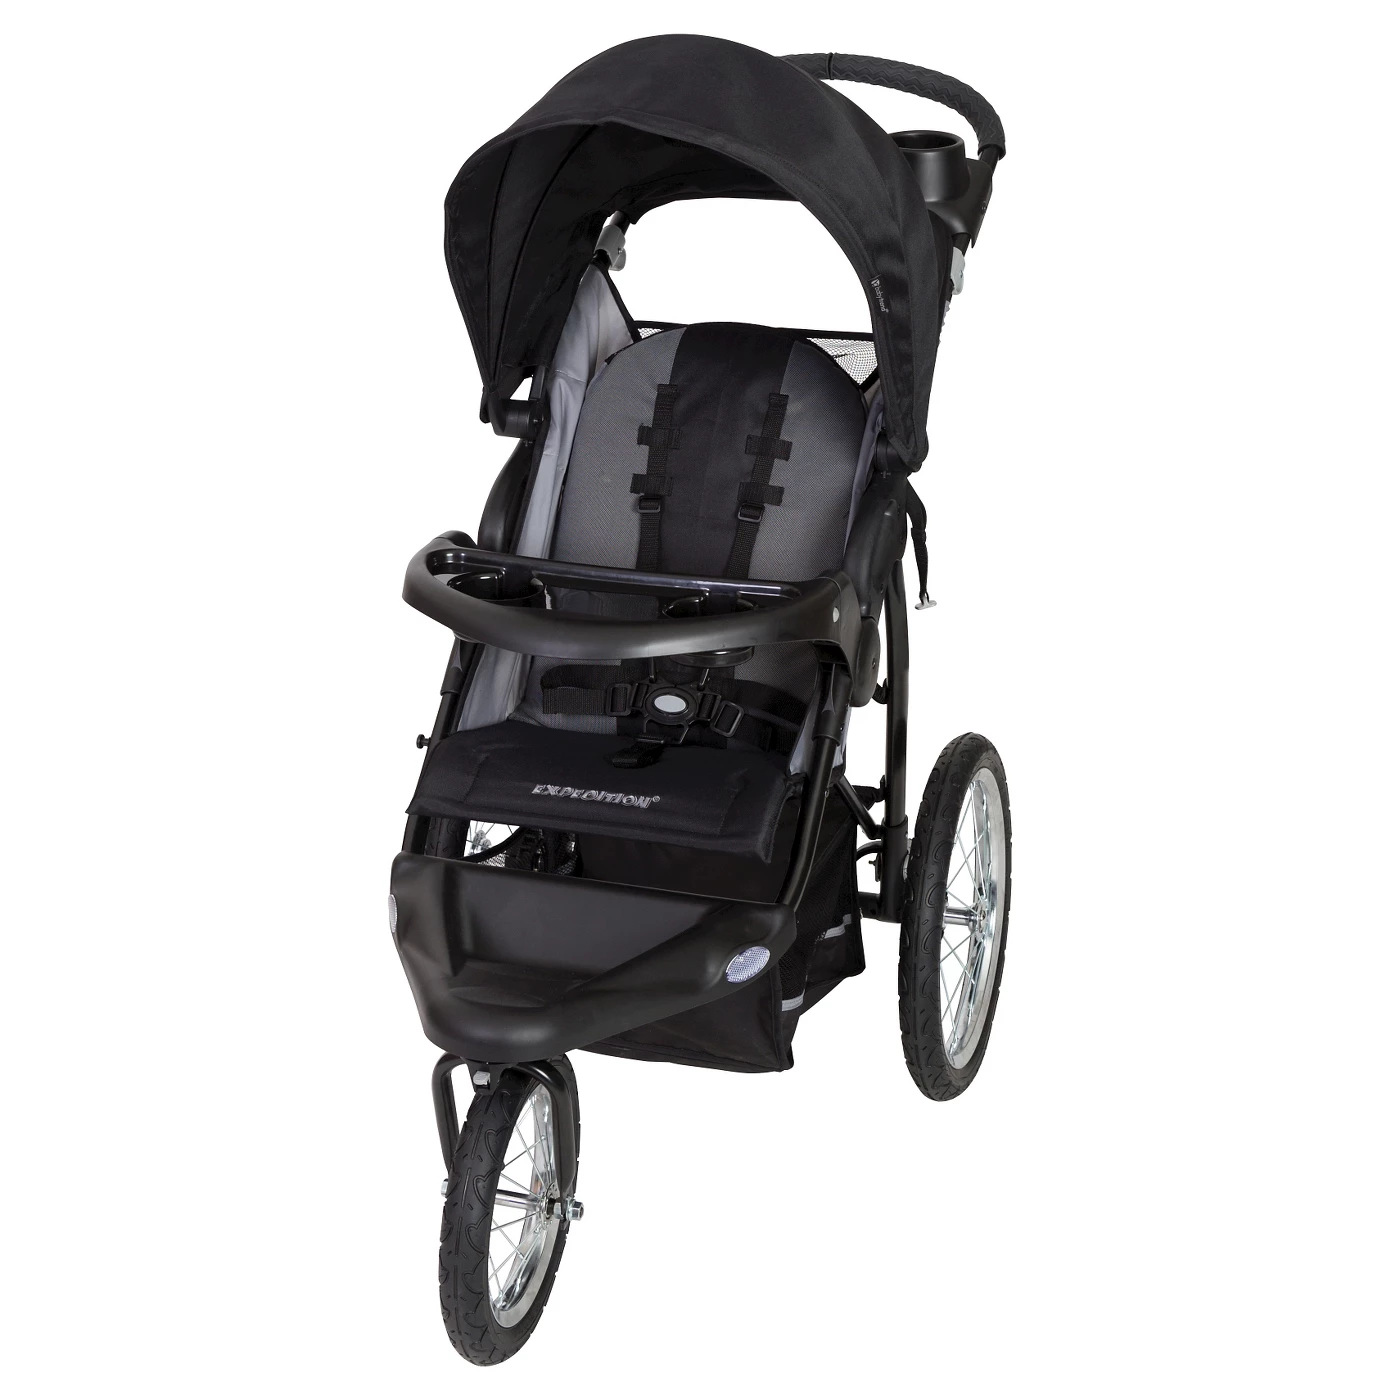 Baby Trend Expedition RG Jogger Stroller - image 1 of 6